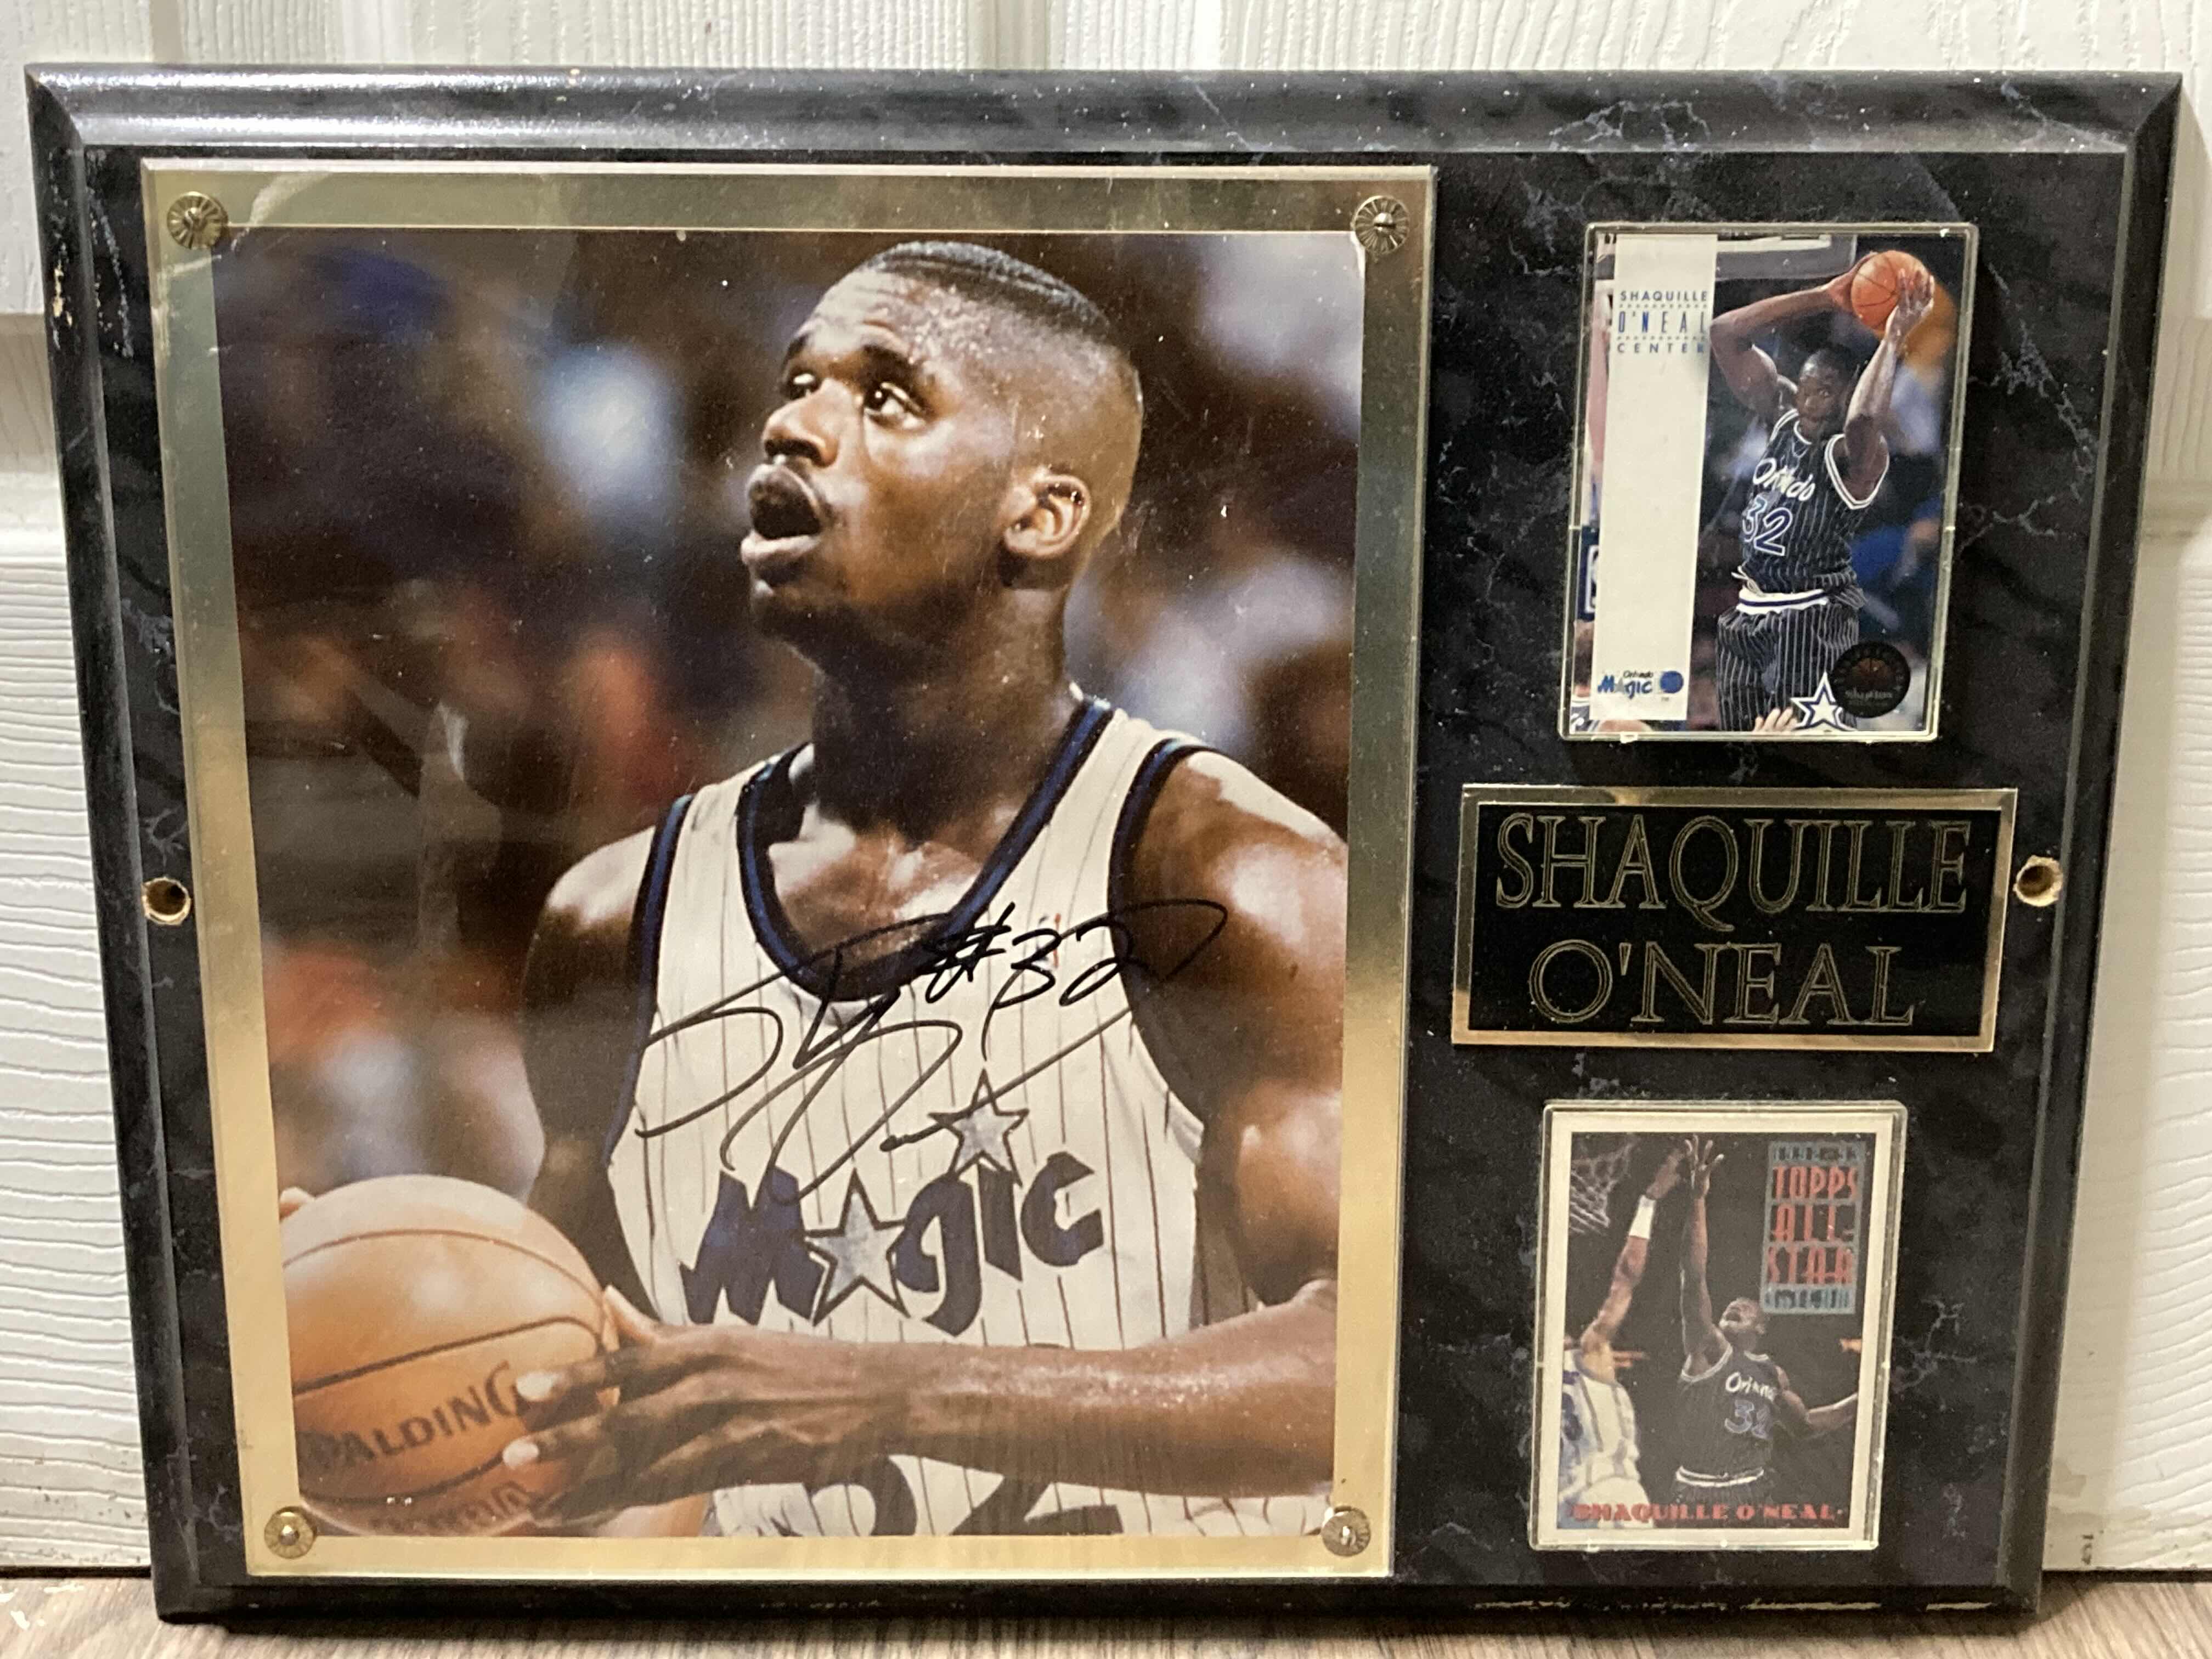 Photo 1 of SHAQUILLE O’NEAL MAGIC #32 MEMORABILIA PLAQUE AUTOGRAPHED BY SHAQUILLE O’NEAL W PLAYERS CARDS & COA 15” X 12”